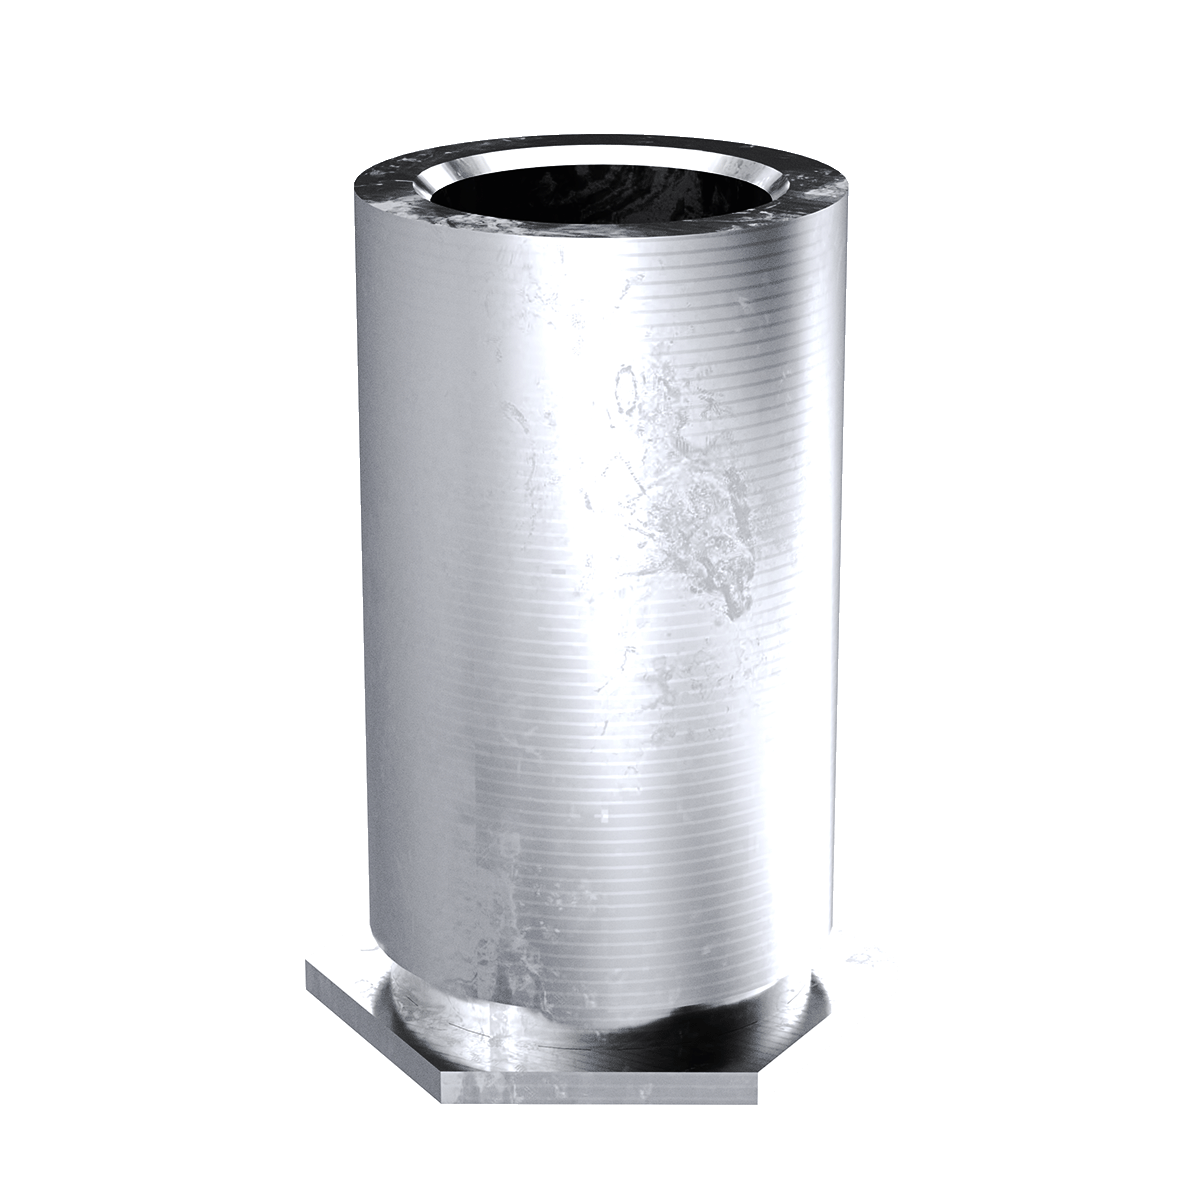 Self-Clinching Standoff, Through Unthreaded, 300 Series Stainless Steel, Passivated, 0.116 x 0.562, Hole Dia.: 0.213, 100 Pack